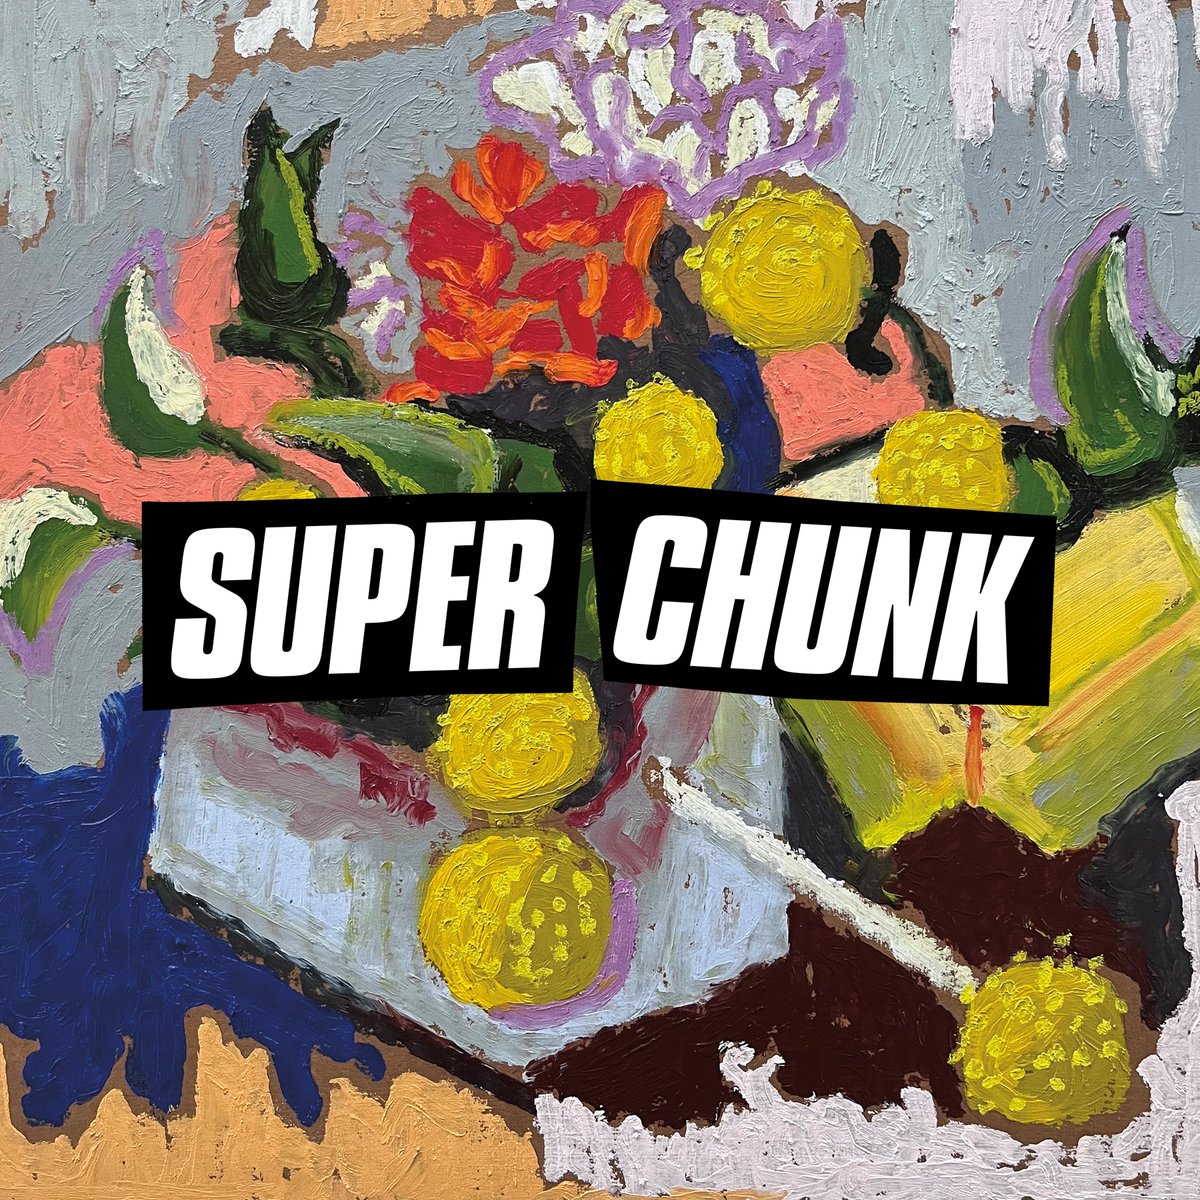 Streaming today is the B-side “As in a Blender' of @superchunk's January 7-inch! Listen/browse: lnk.to/EverybodyDiesS…. April marks 30yrs of Superchunk’s 1st Merge full-length, 'Foolish,' so their digital catalog (minus “As in a Blender”) is pay-what-you-want on Bandcamp today!